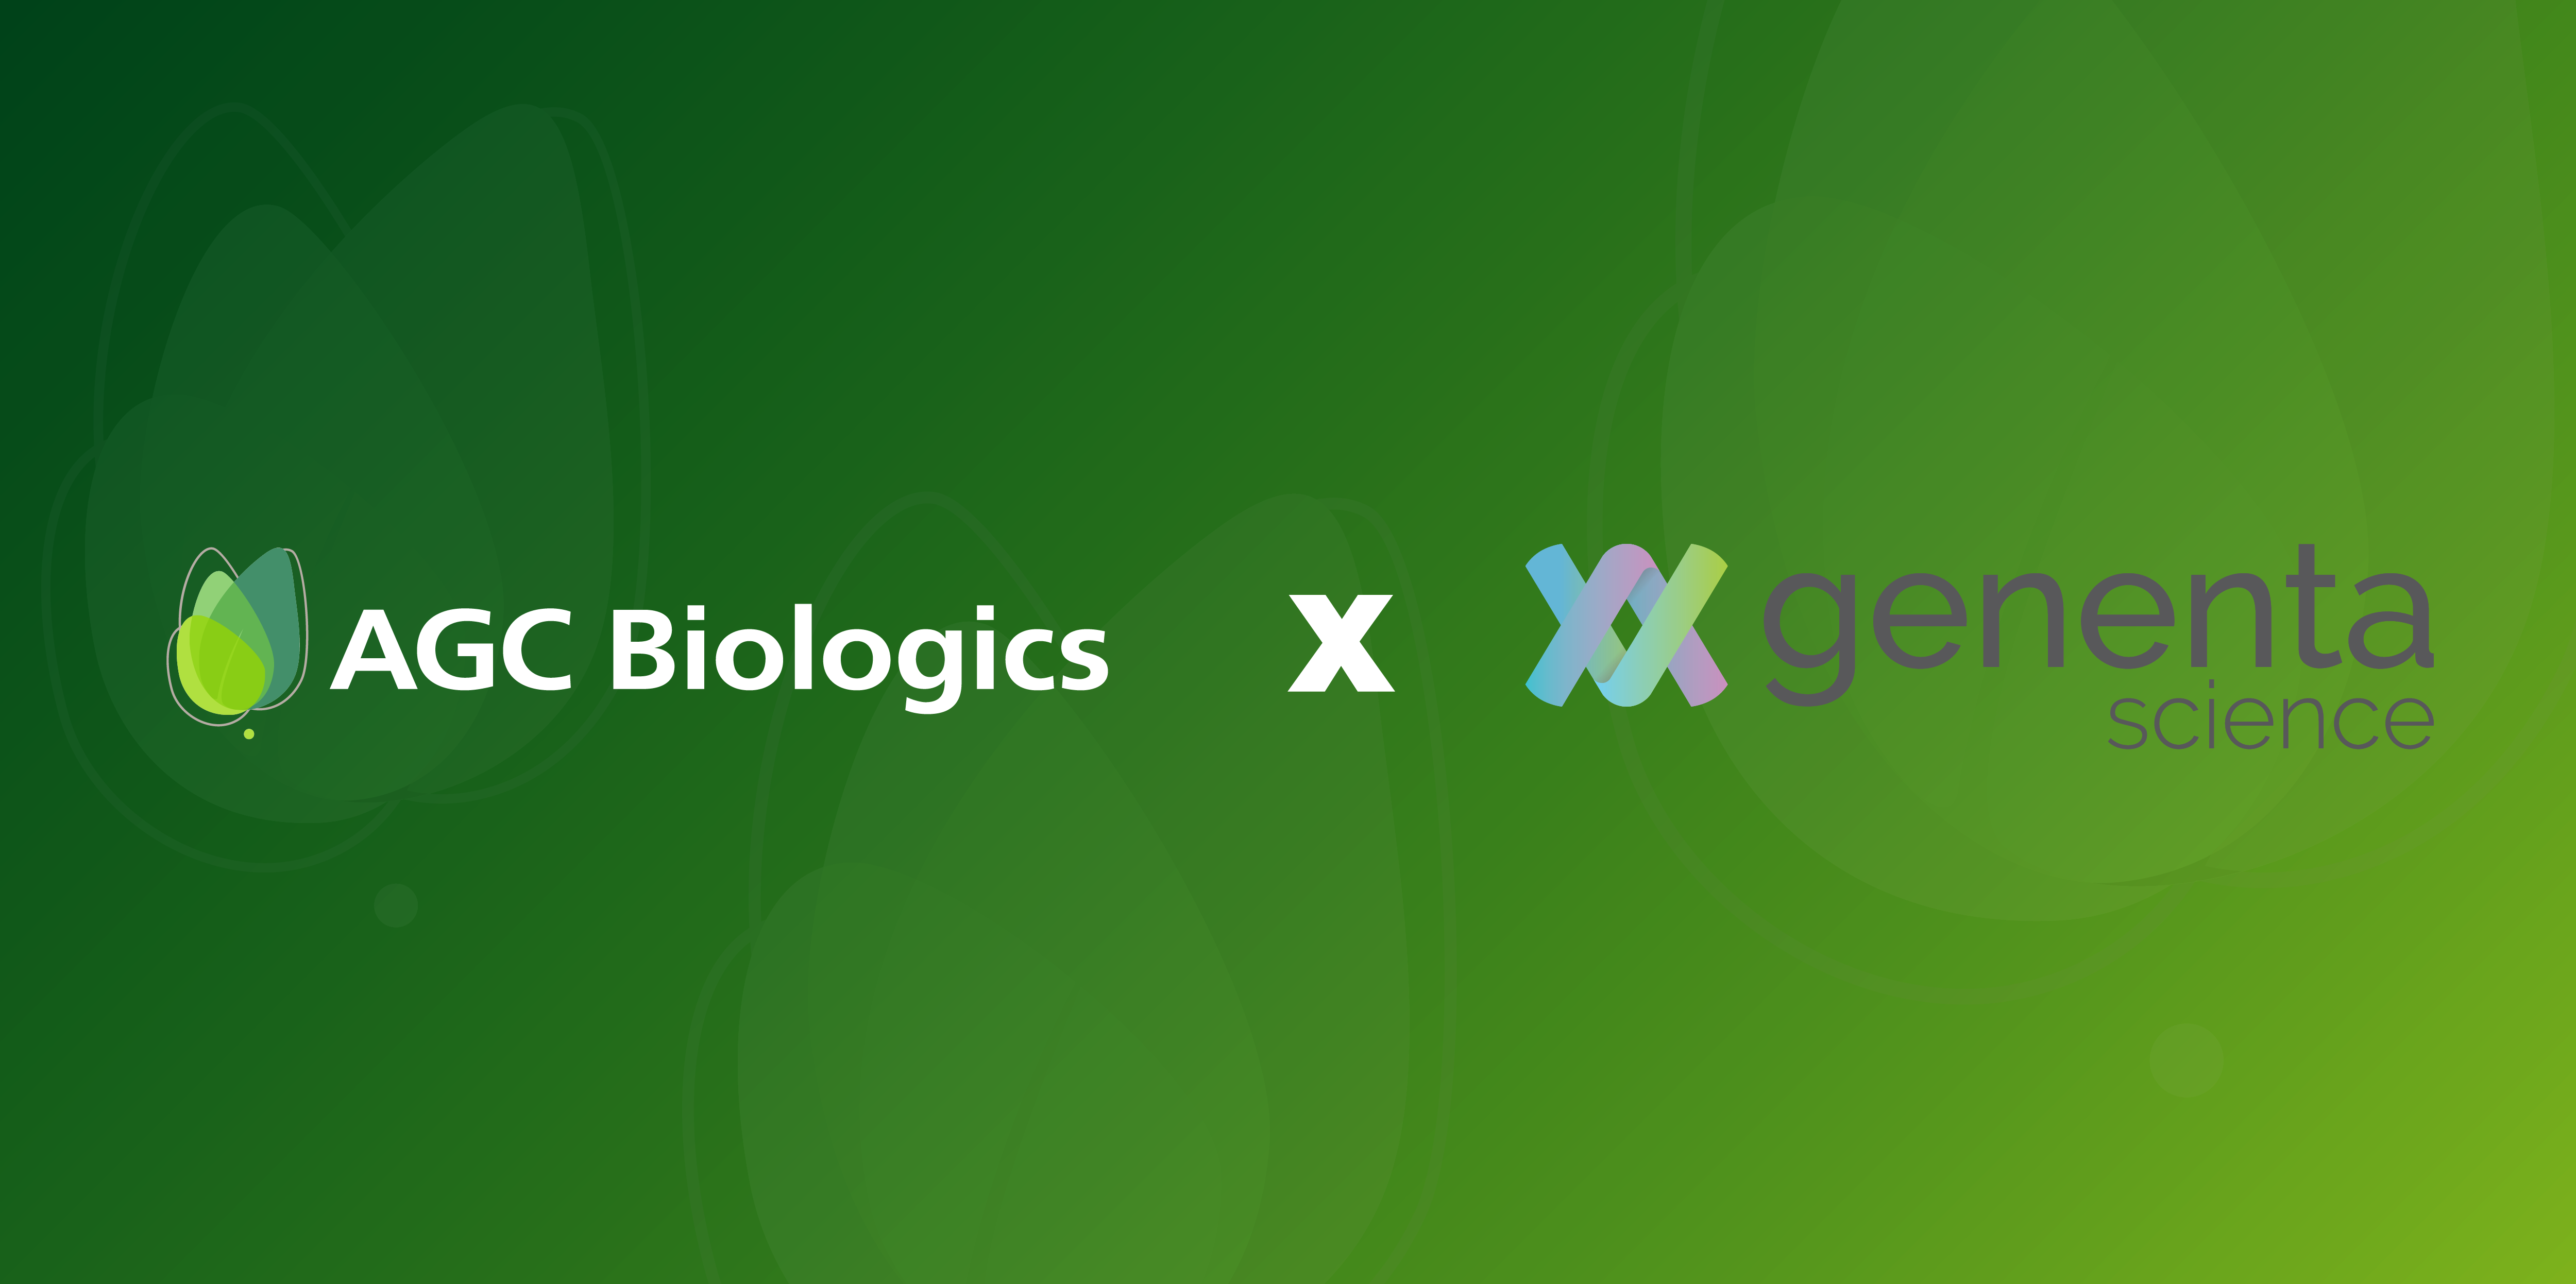 AGC Biologics partners with Genenta Science